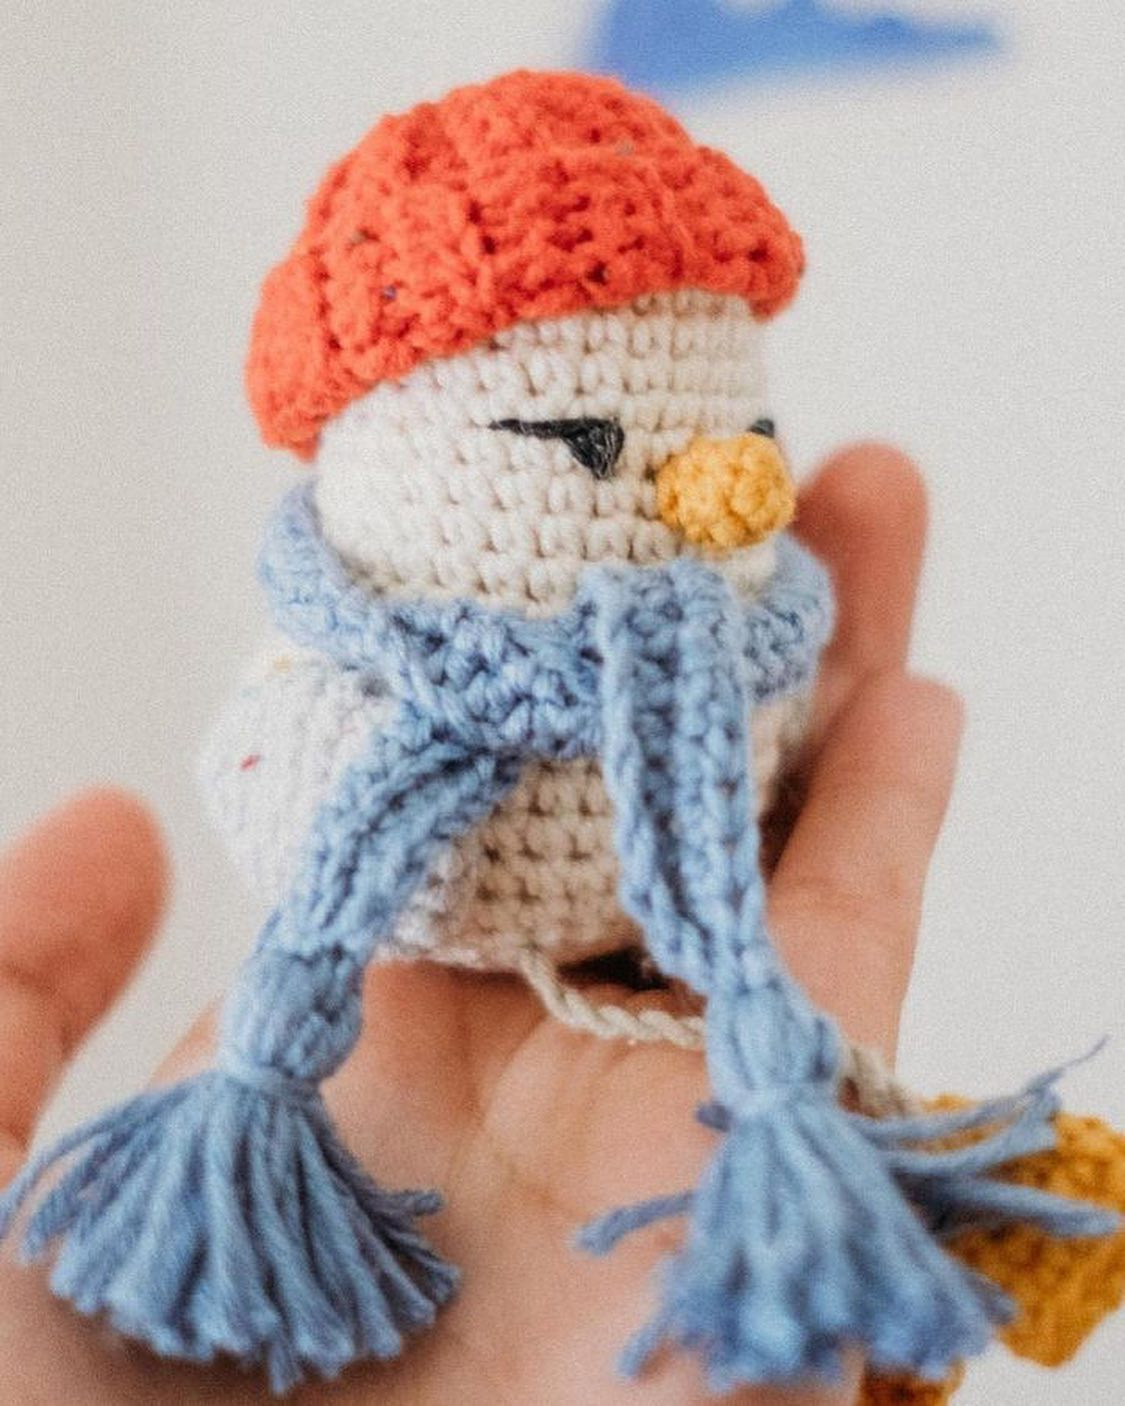 Crochet pattern for a chicken wearing a hat and scarf.